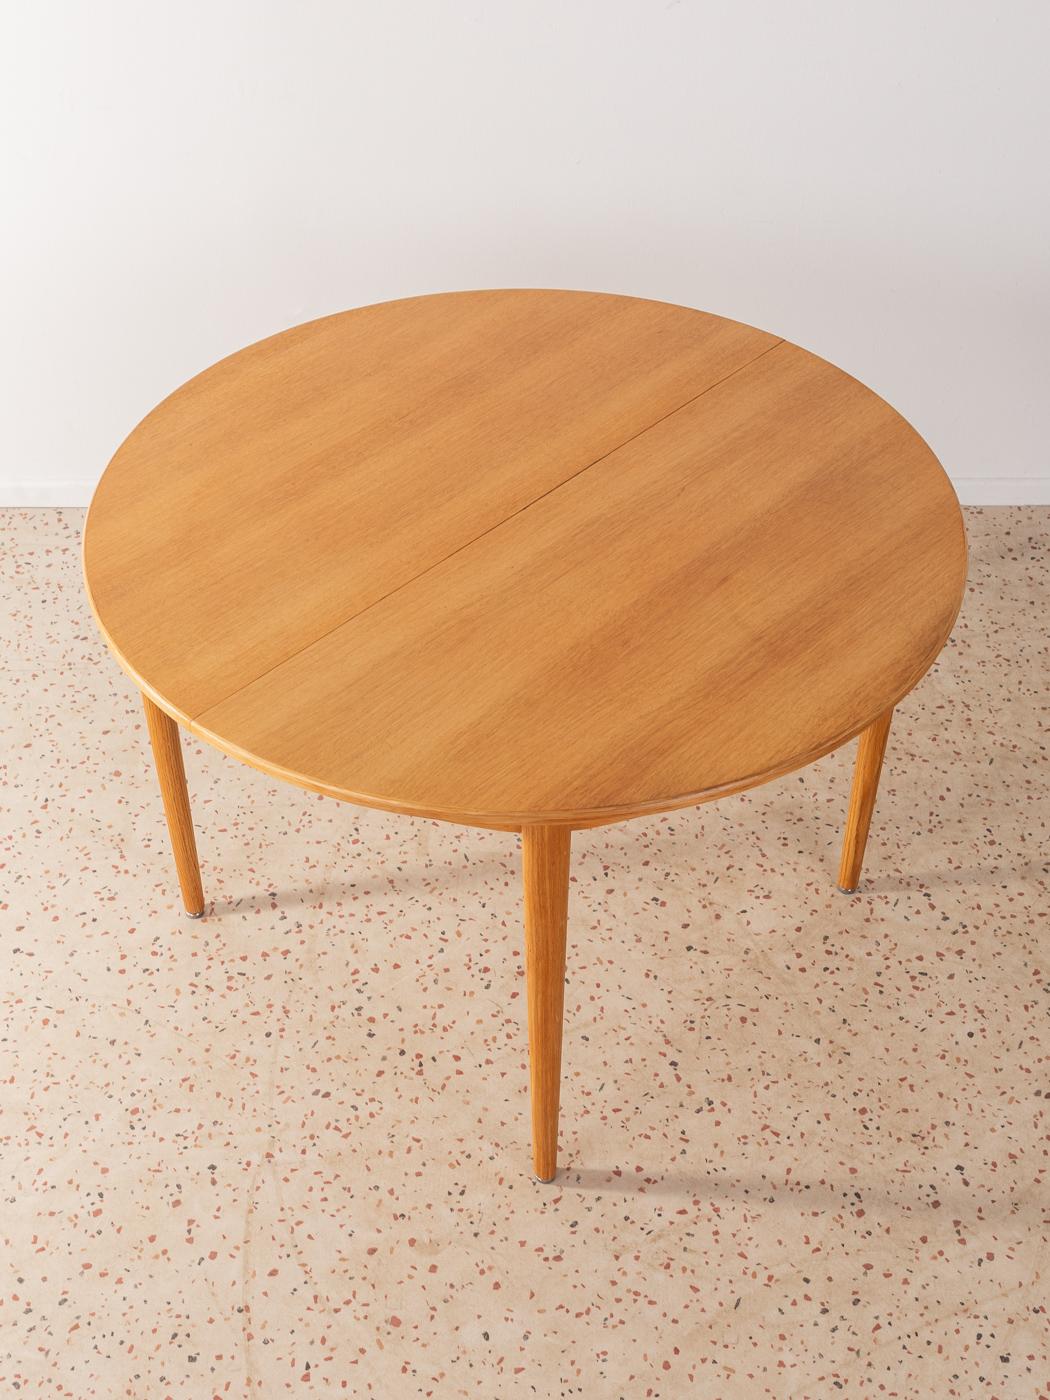 1960s Danish Design Extendable Dining Table For Sale 2